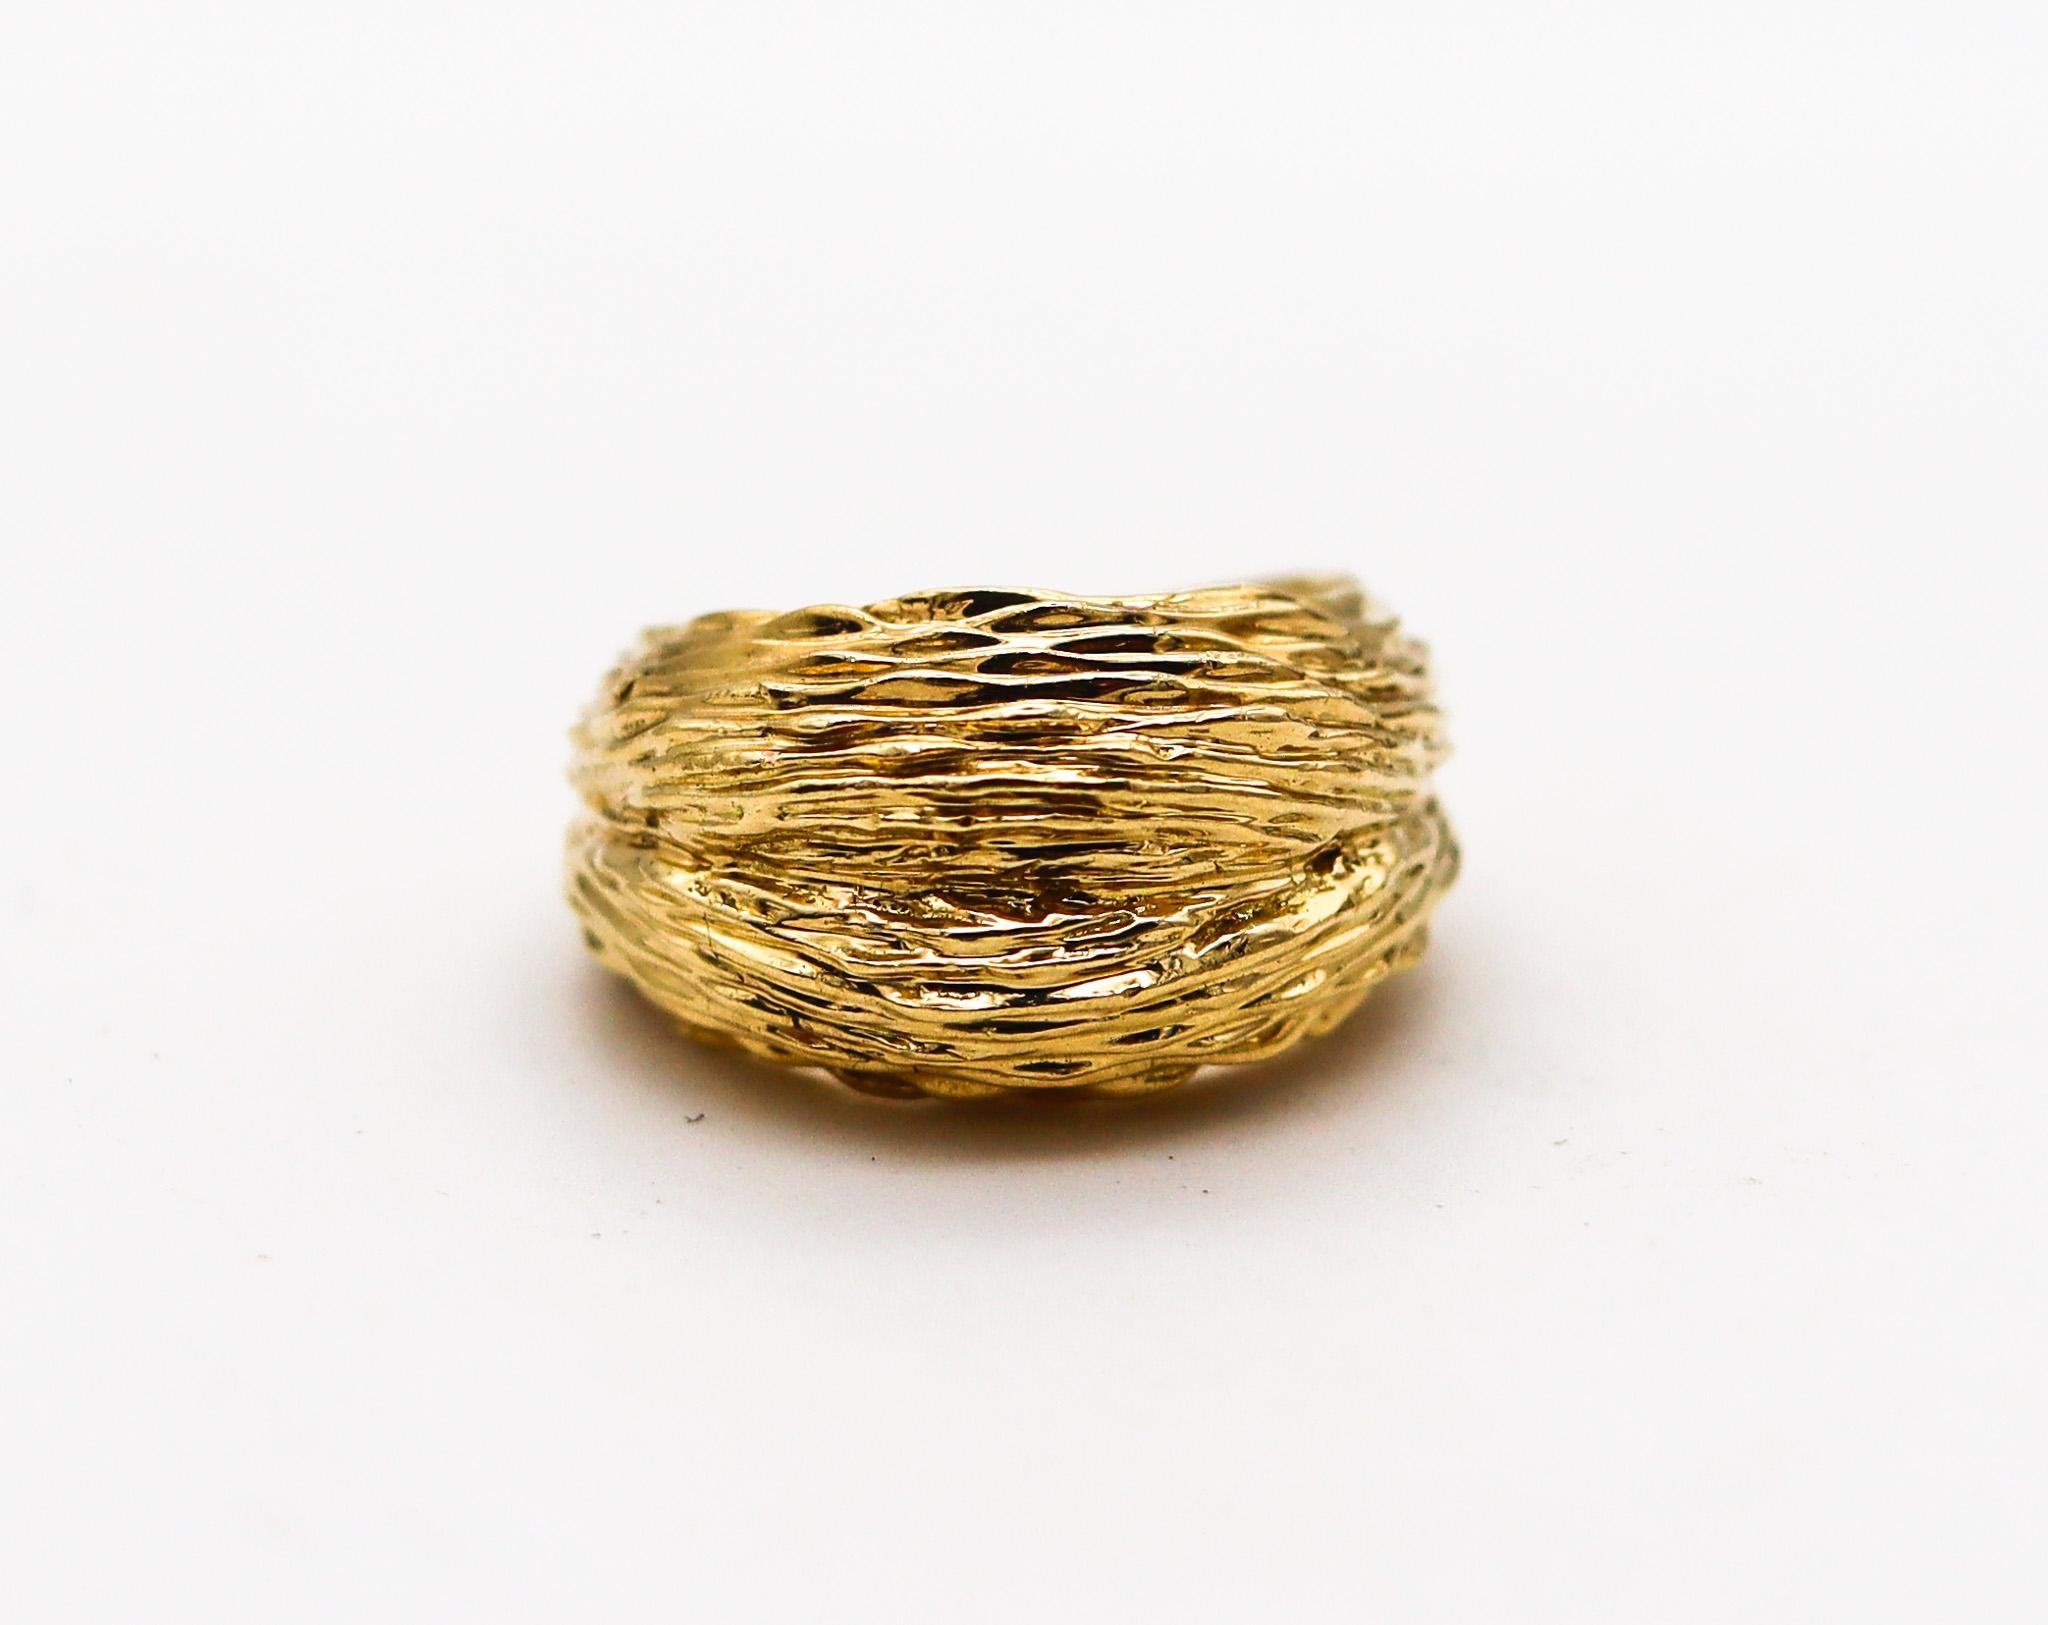 Modernist Van Cleef & Arpels 1970 Textured Cocktail Ring in Solid 18Kt Yellow Gold